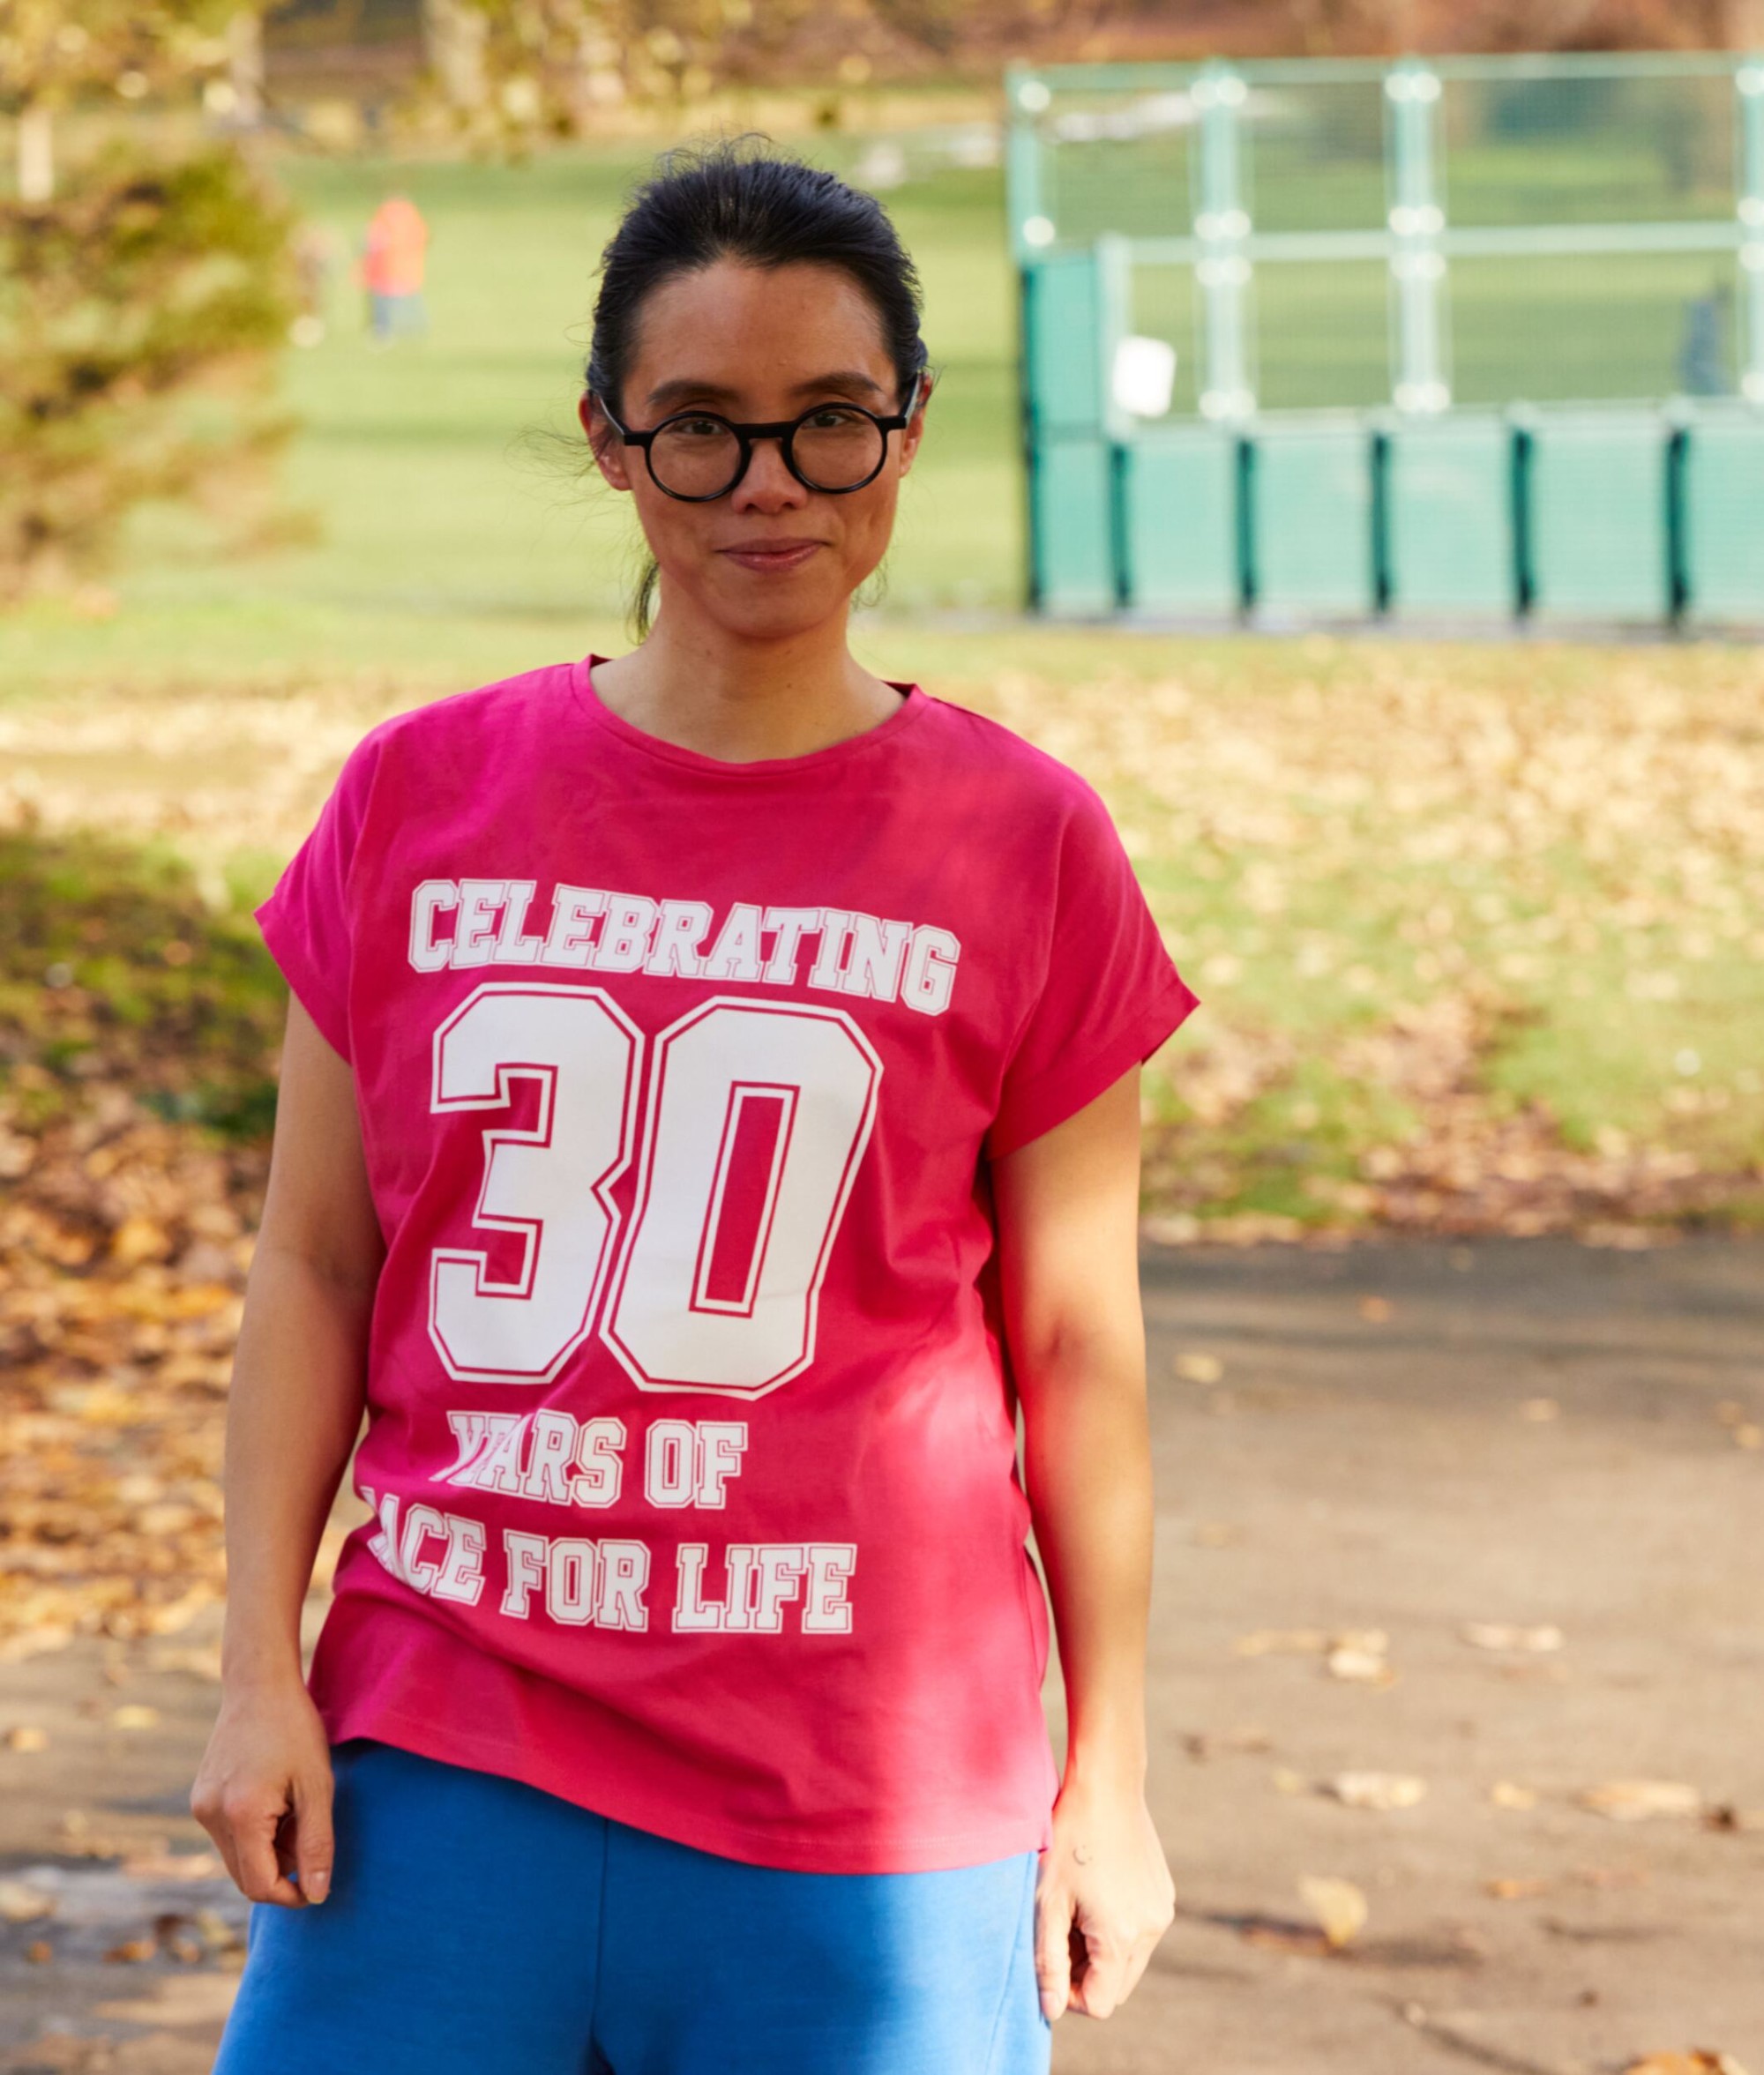 Race for Life 30th Anniversary Organic Cotton Ladies T-Shirt Cancer Research UK